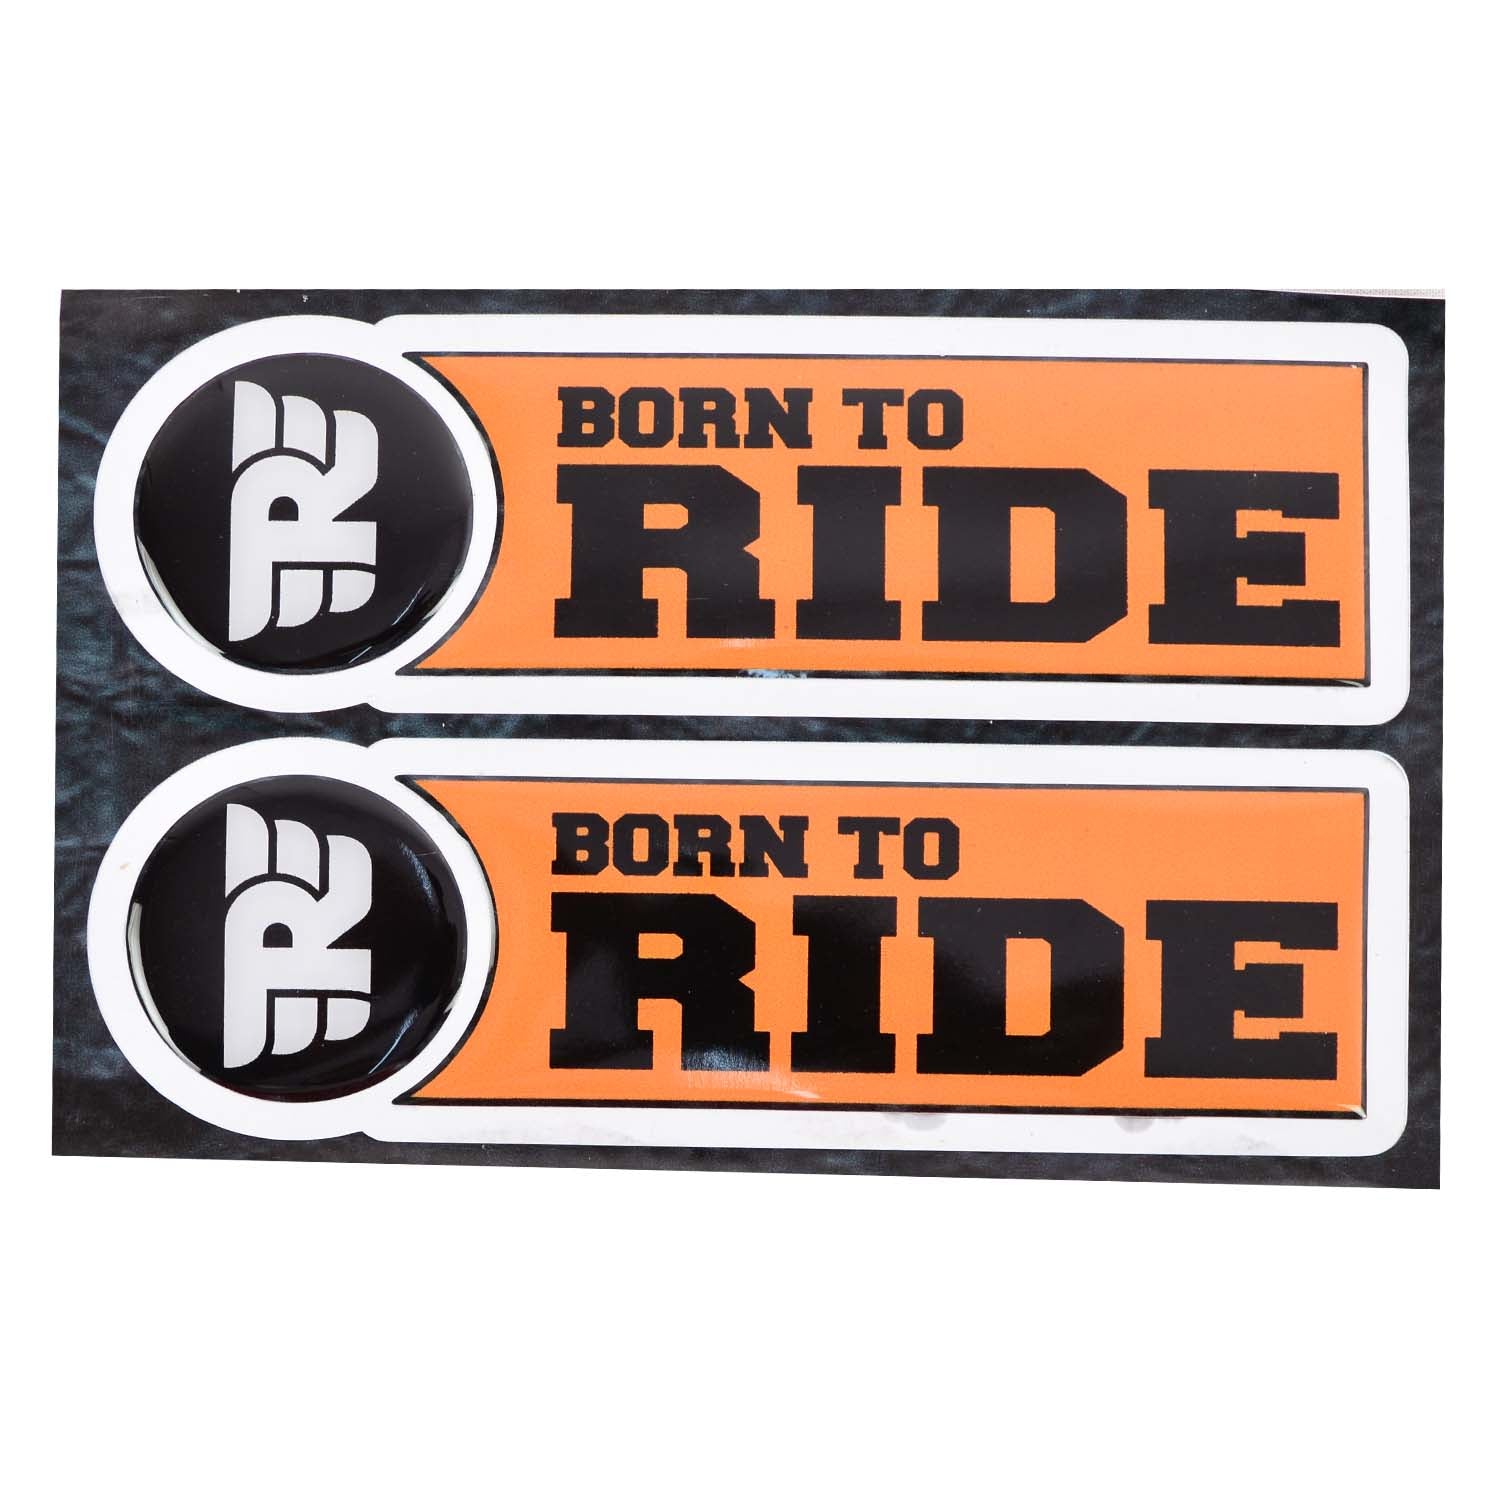 Born to Ride Logo for T-Shirt by Reno Rennie on Dribbble